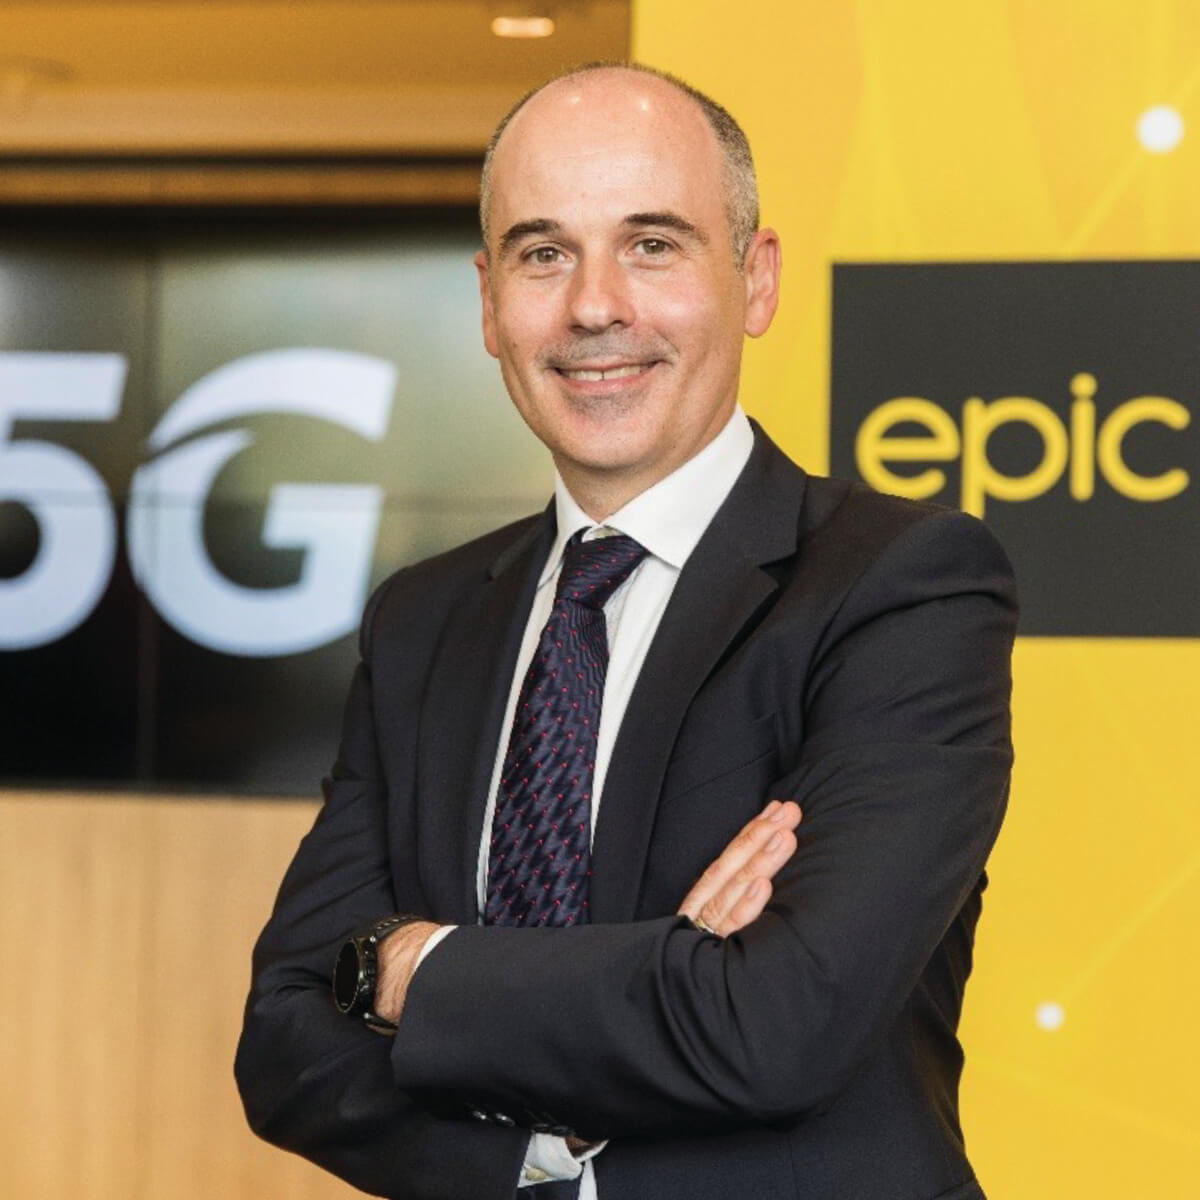 Epic launched 5G services in over 25 countries and gets Apple certification